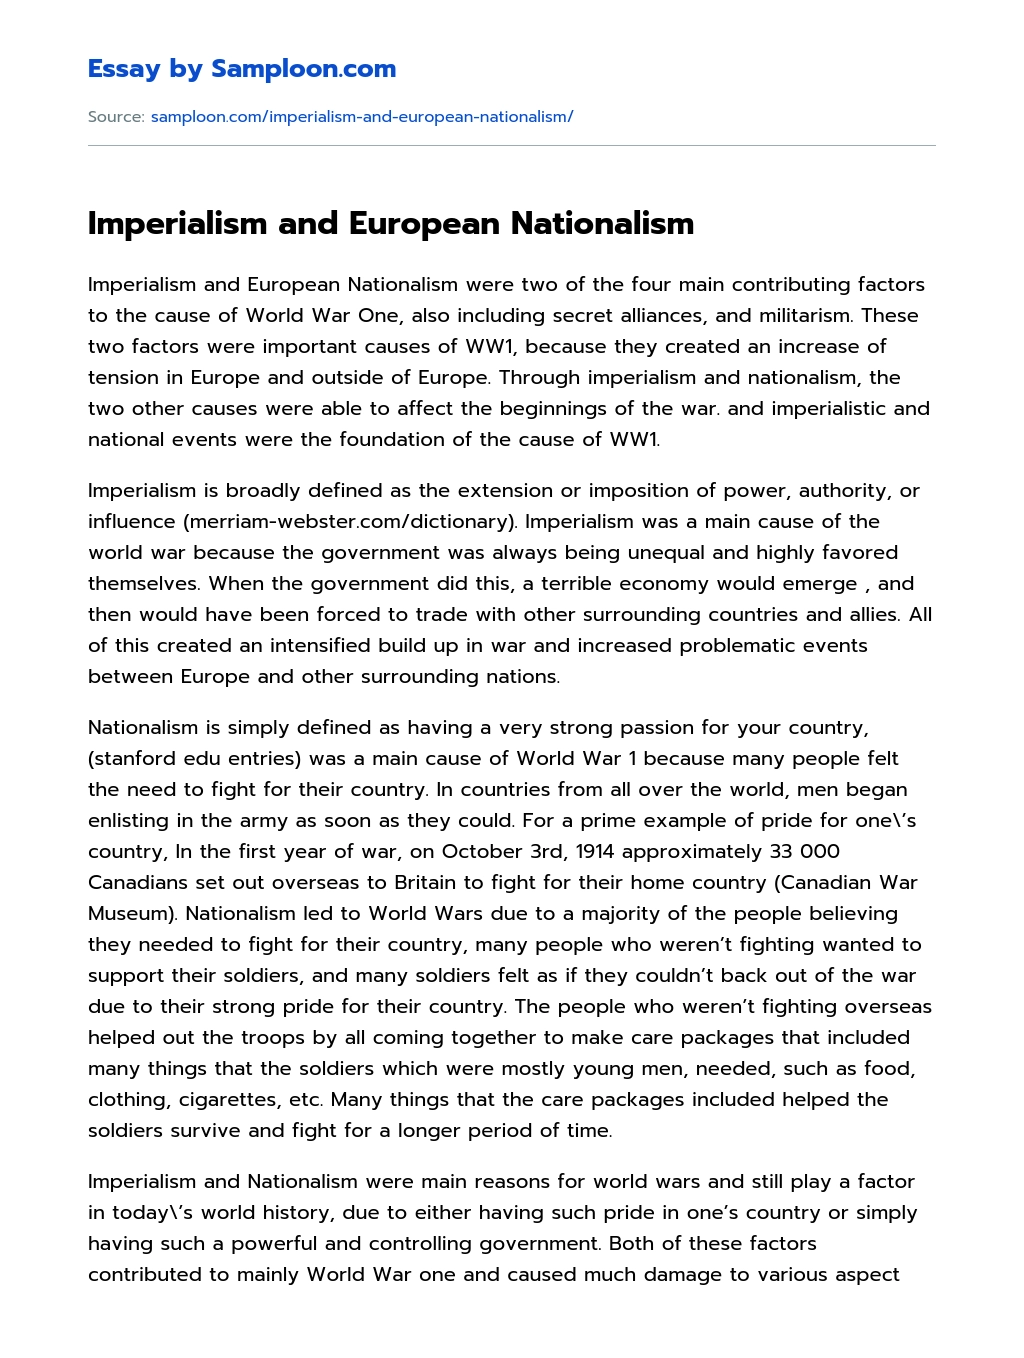 Imperialism and European Nationalism essay